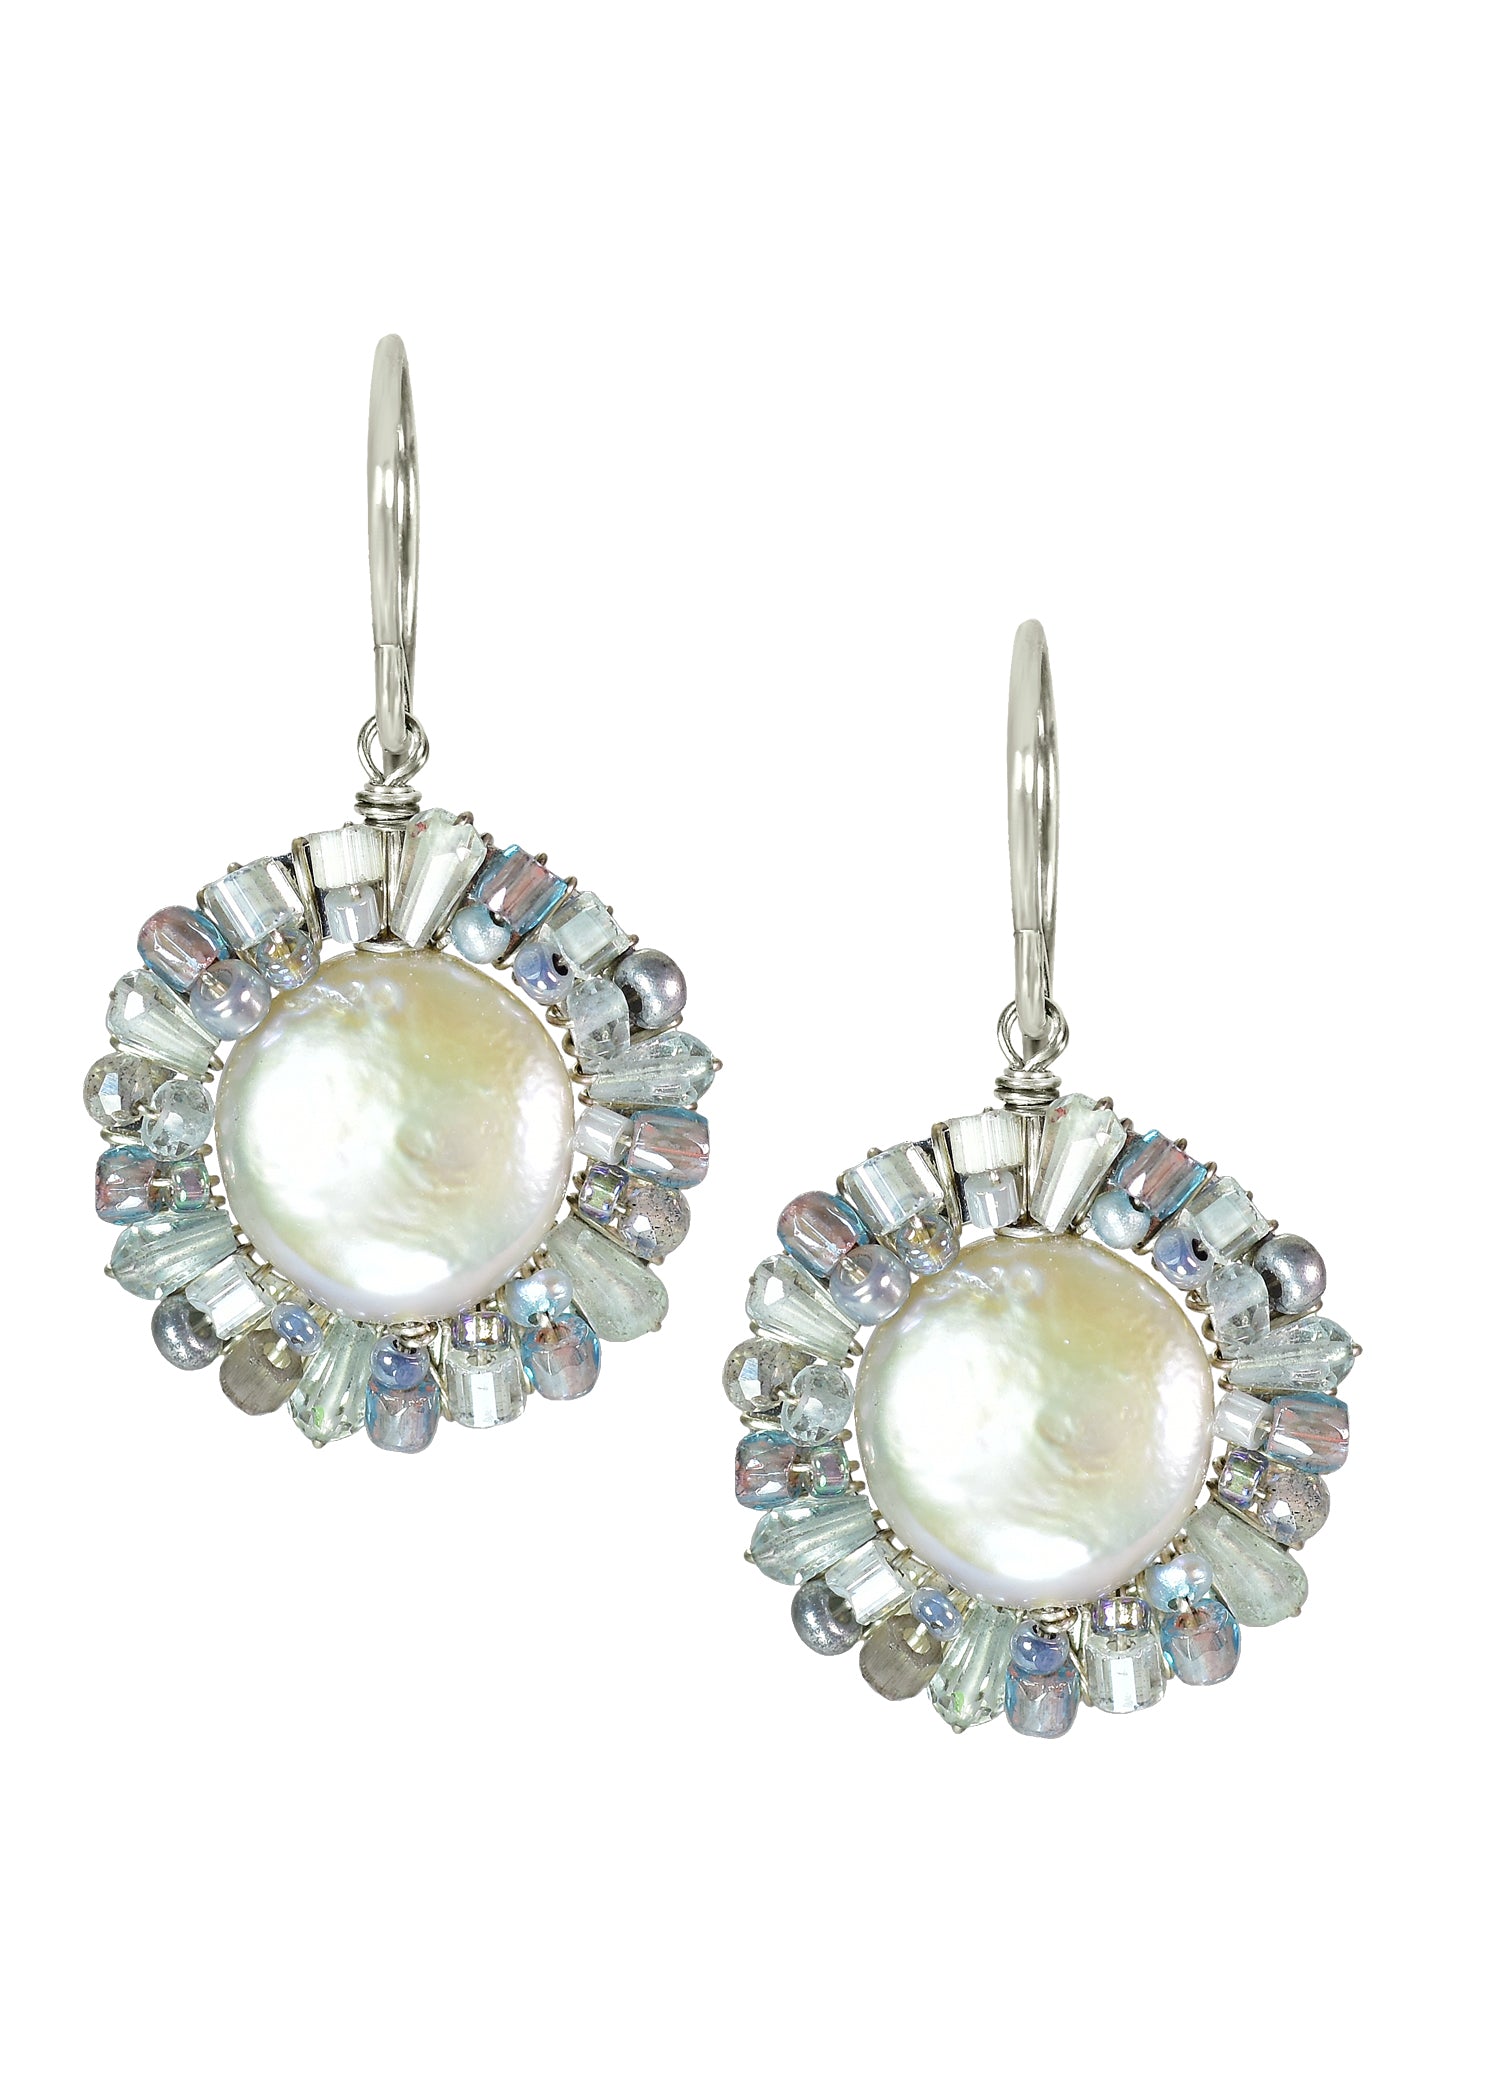 Freshwater pearl Aquamarine Labradorite Seed beads Sterling silver Earrings measure 1-1/8" in length (including the ear wires) and 5/8" in width Handmade in our Los Angeles studio